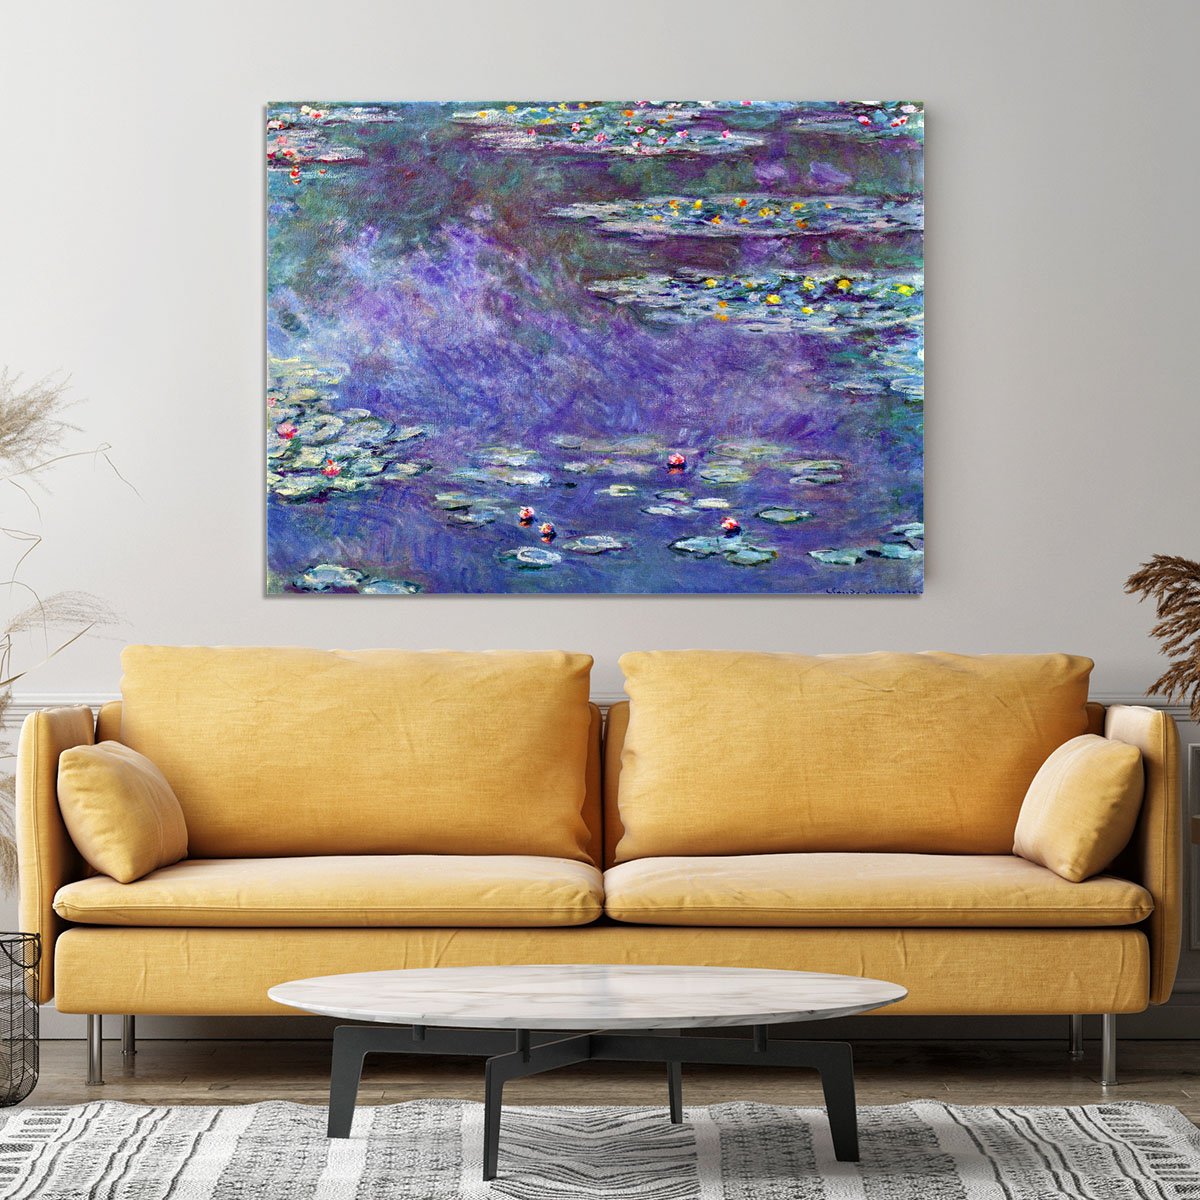 Water Lily Pond 3 by Monet Canvas Print or Poster